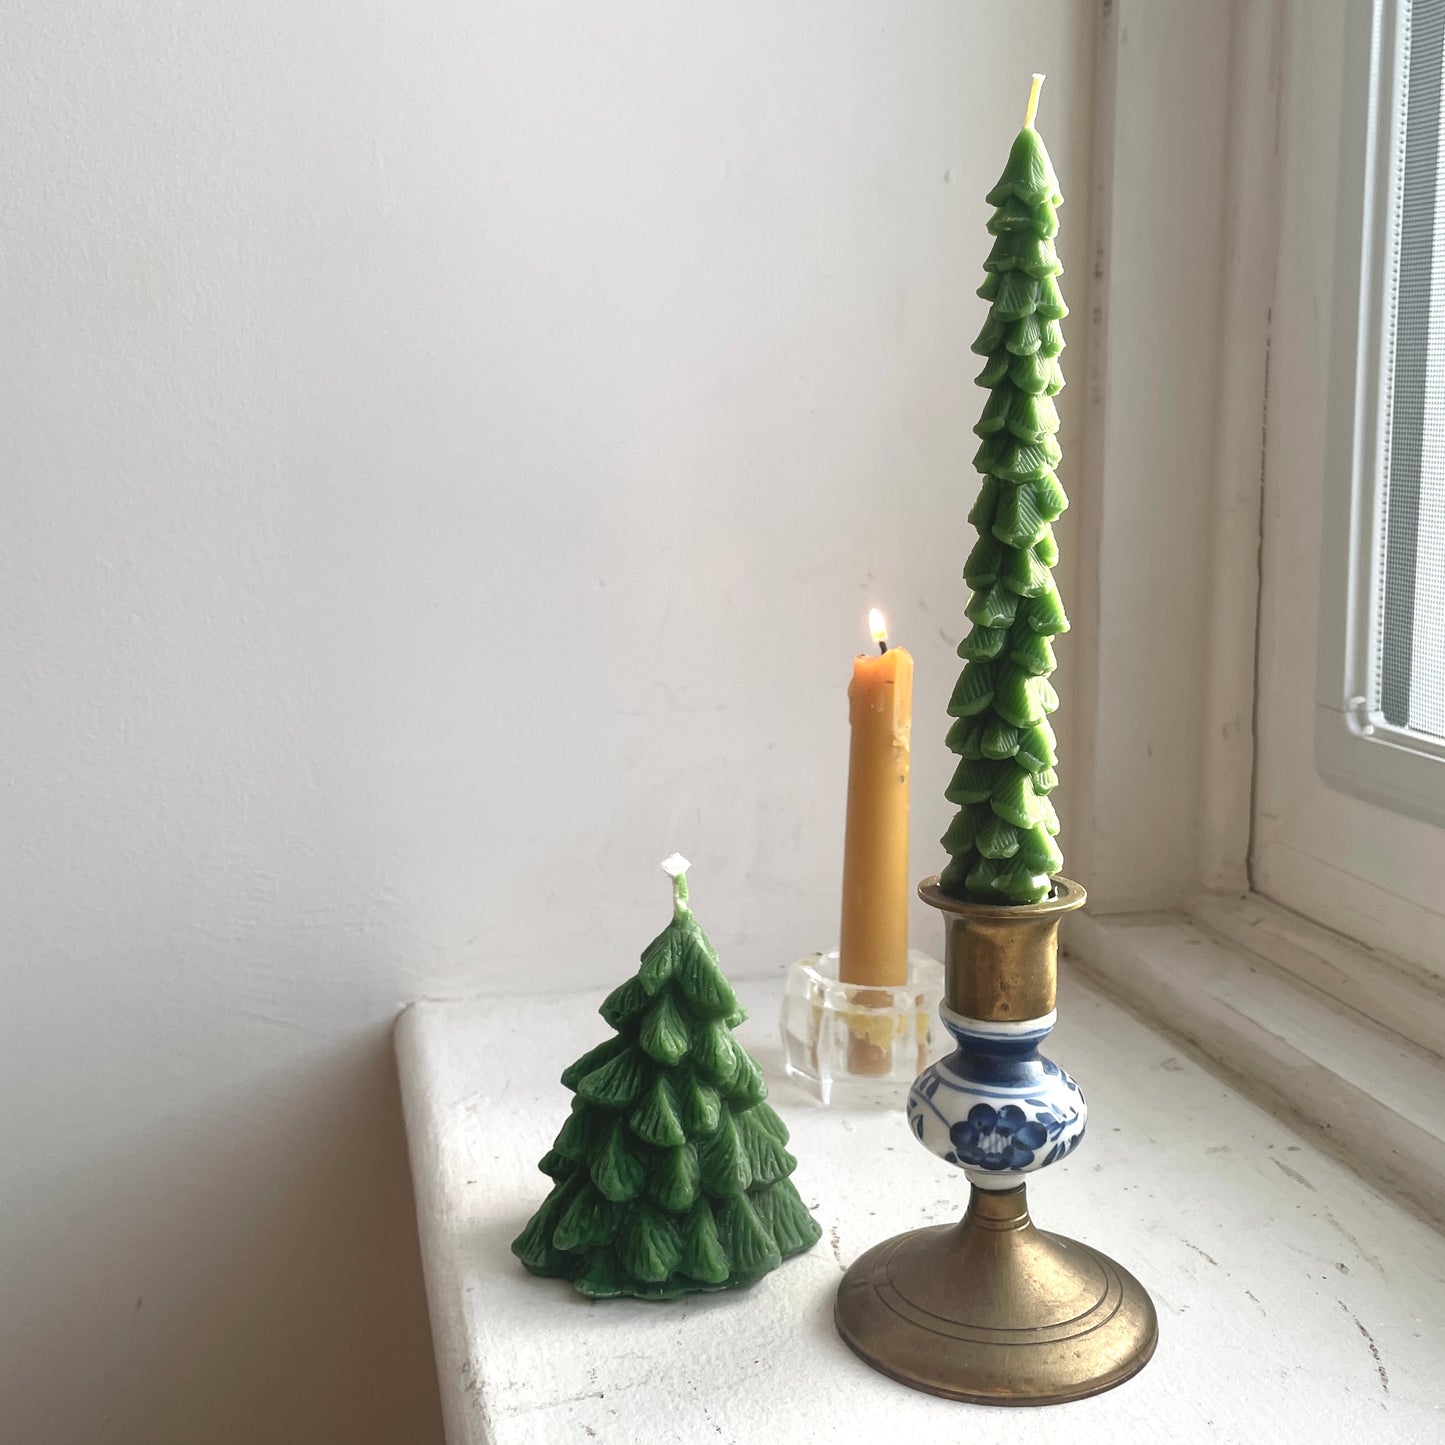 Evergreen Tree Tapers Pair of 2 // Tapers, Christmas Trees, Beeswax Candles, Green, Beeswax